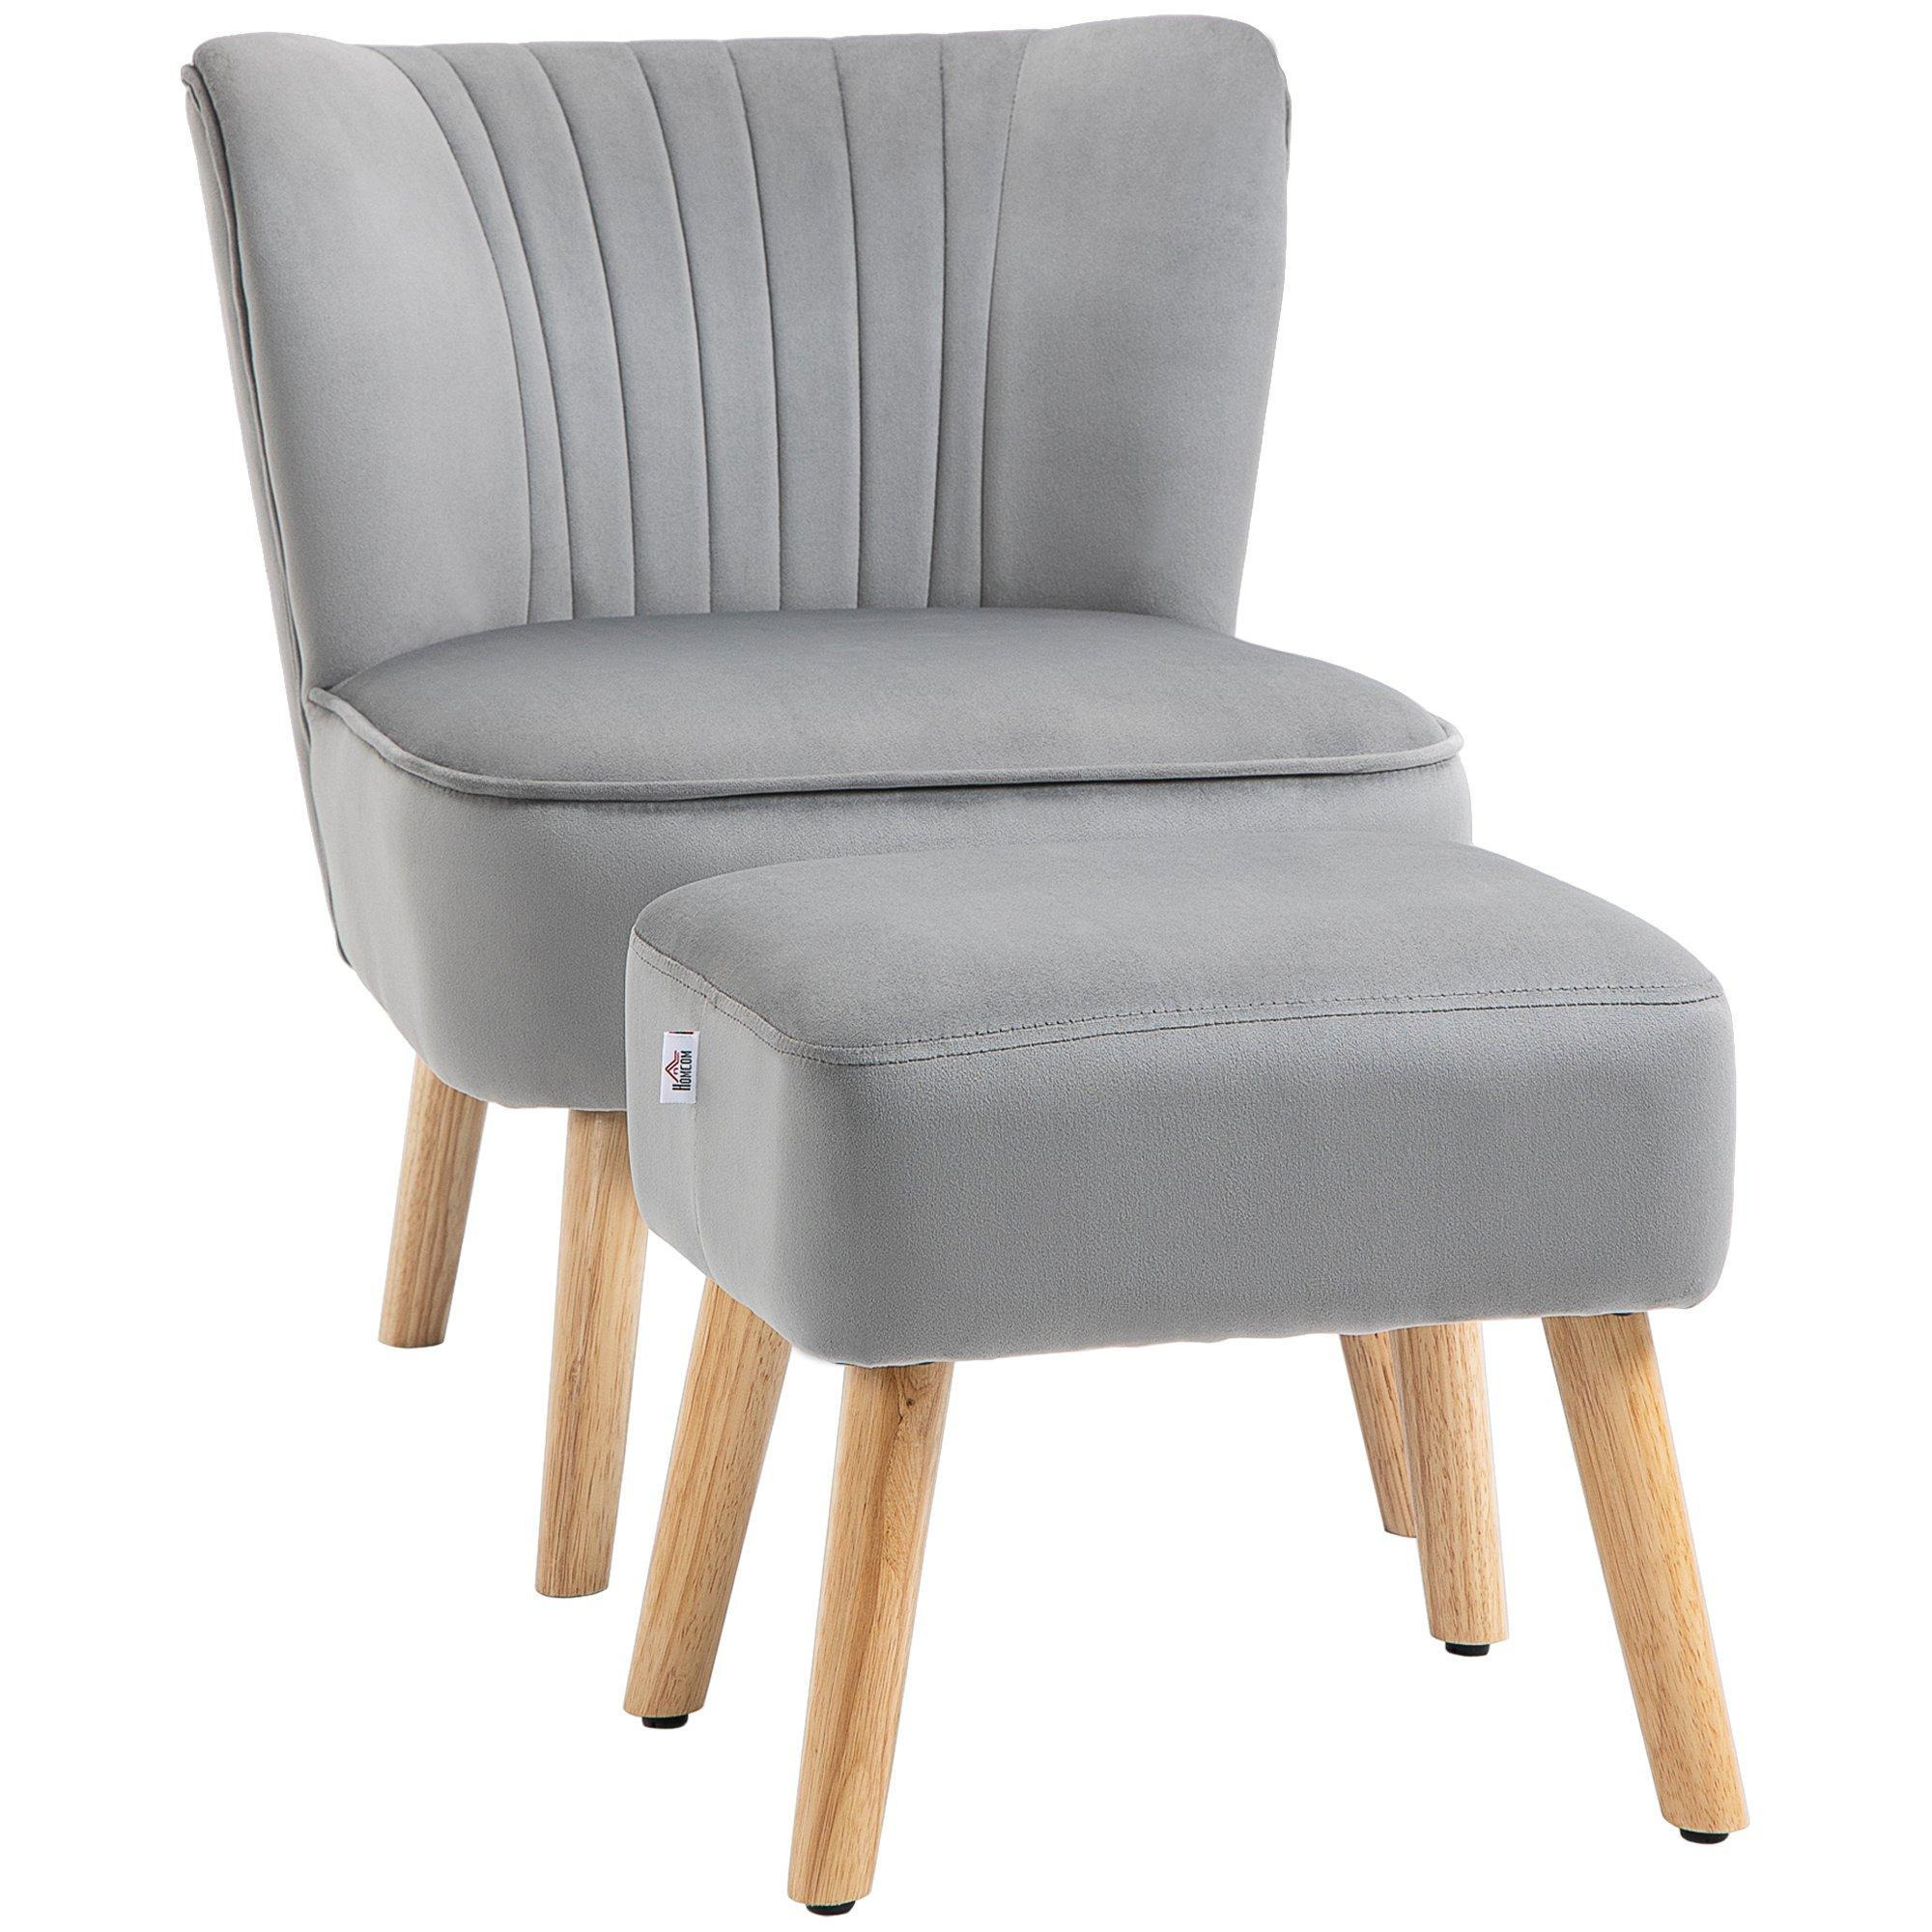 Velvet-Feel Accent Chair with Ottoman Tub Seat Padding Wood Frame - image 1